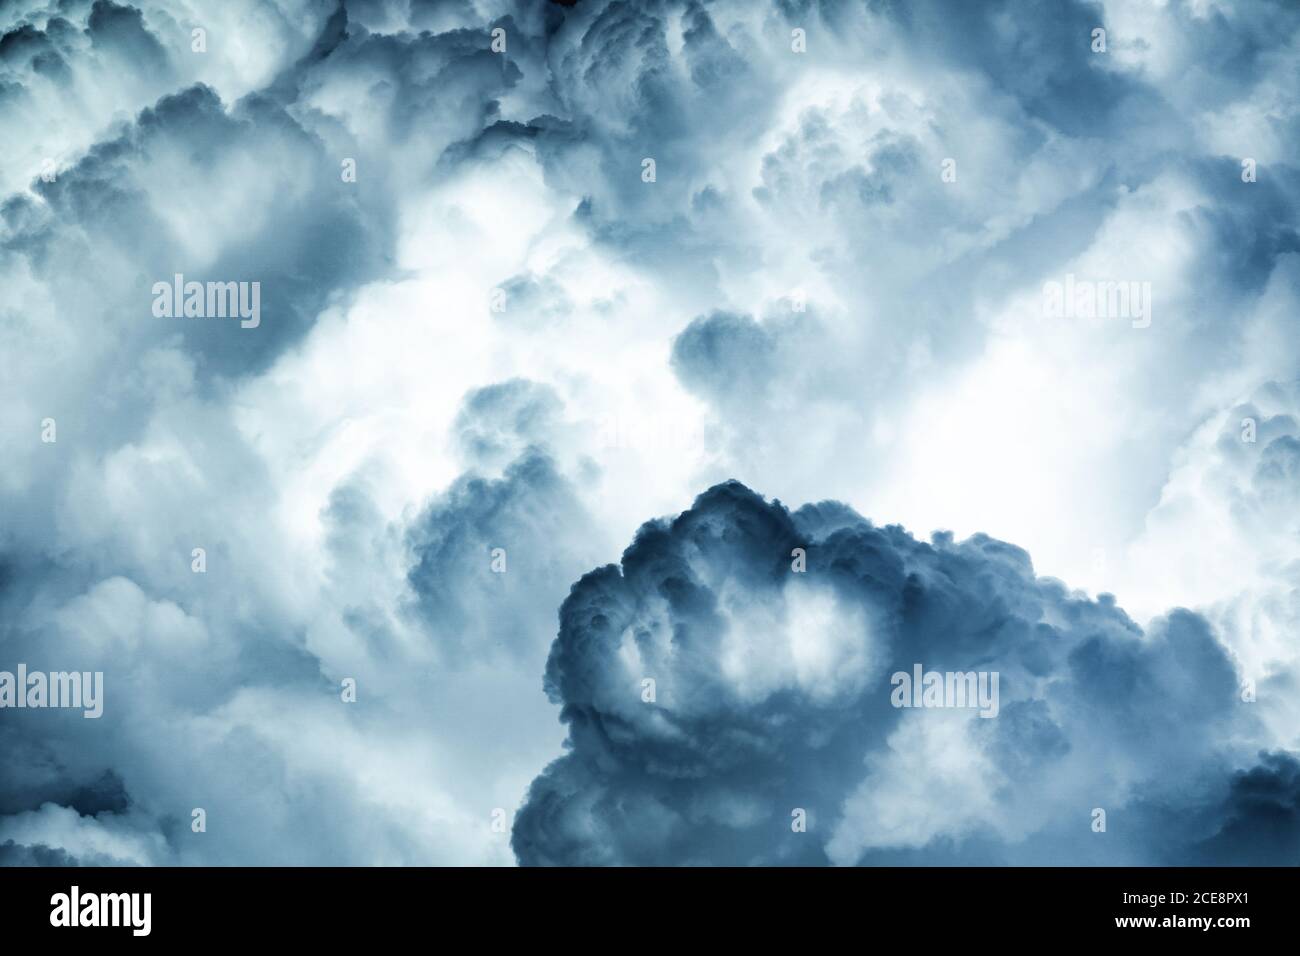 Spectacular abstract background of thunderstorm sky with dark ominous clouds Stock Photo